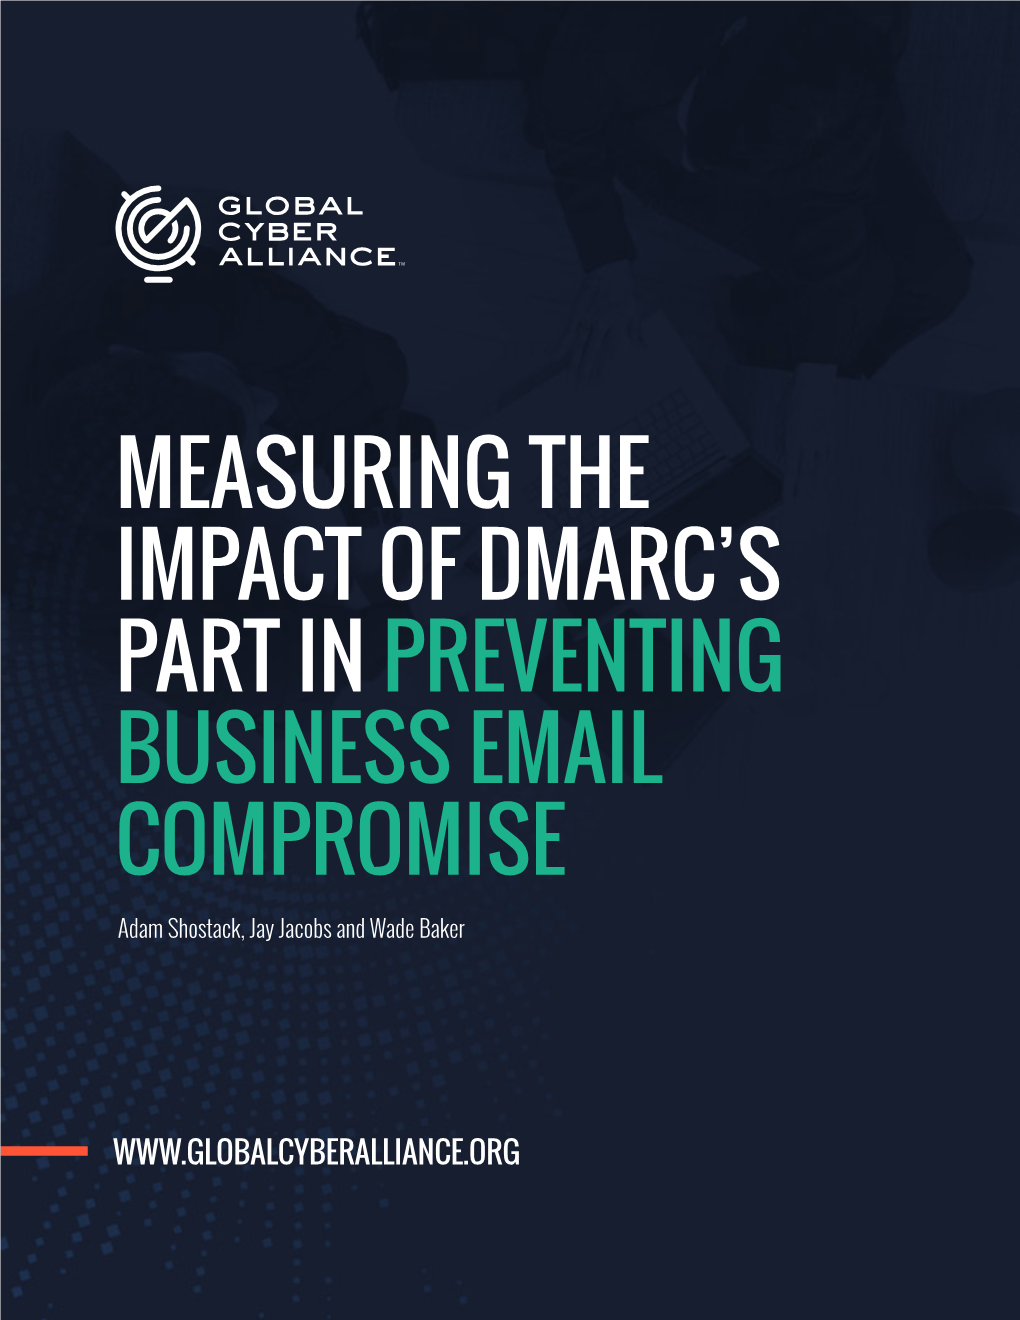 Download the DMARC Report